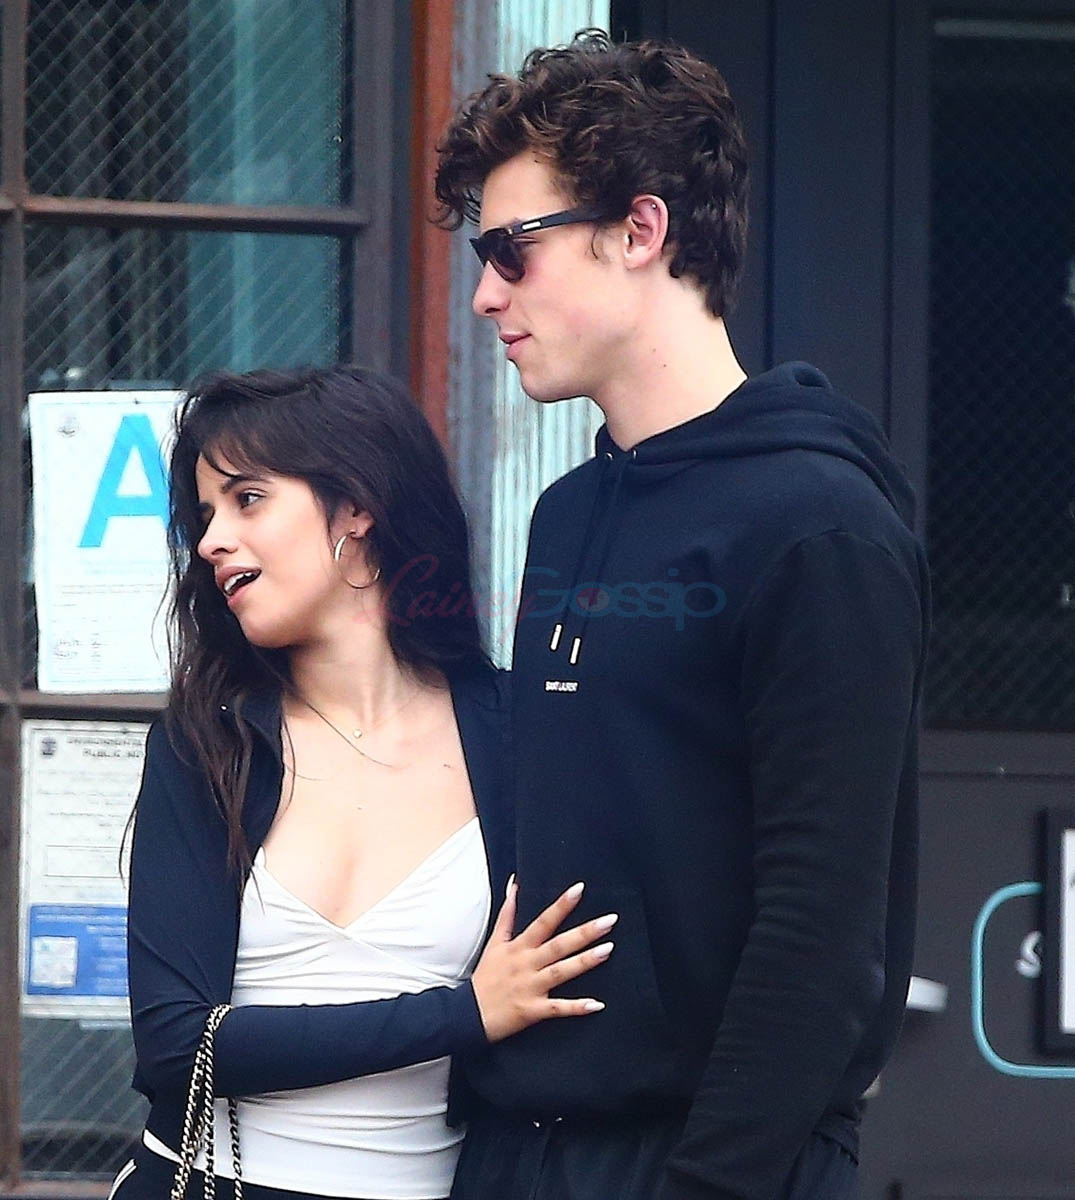 Shawn Mendes and Camila Cabello look very much together during Sunday brunch